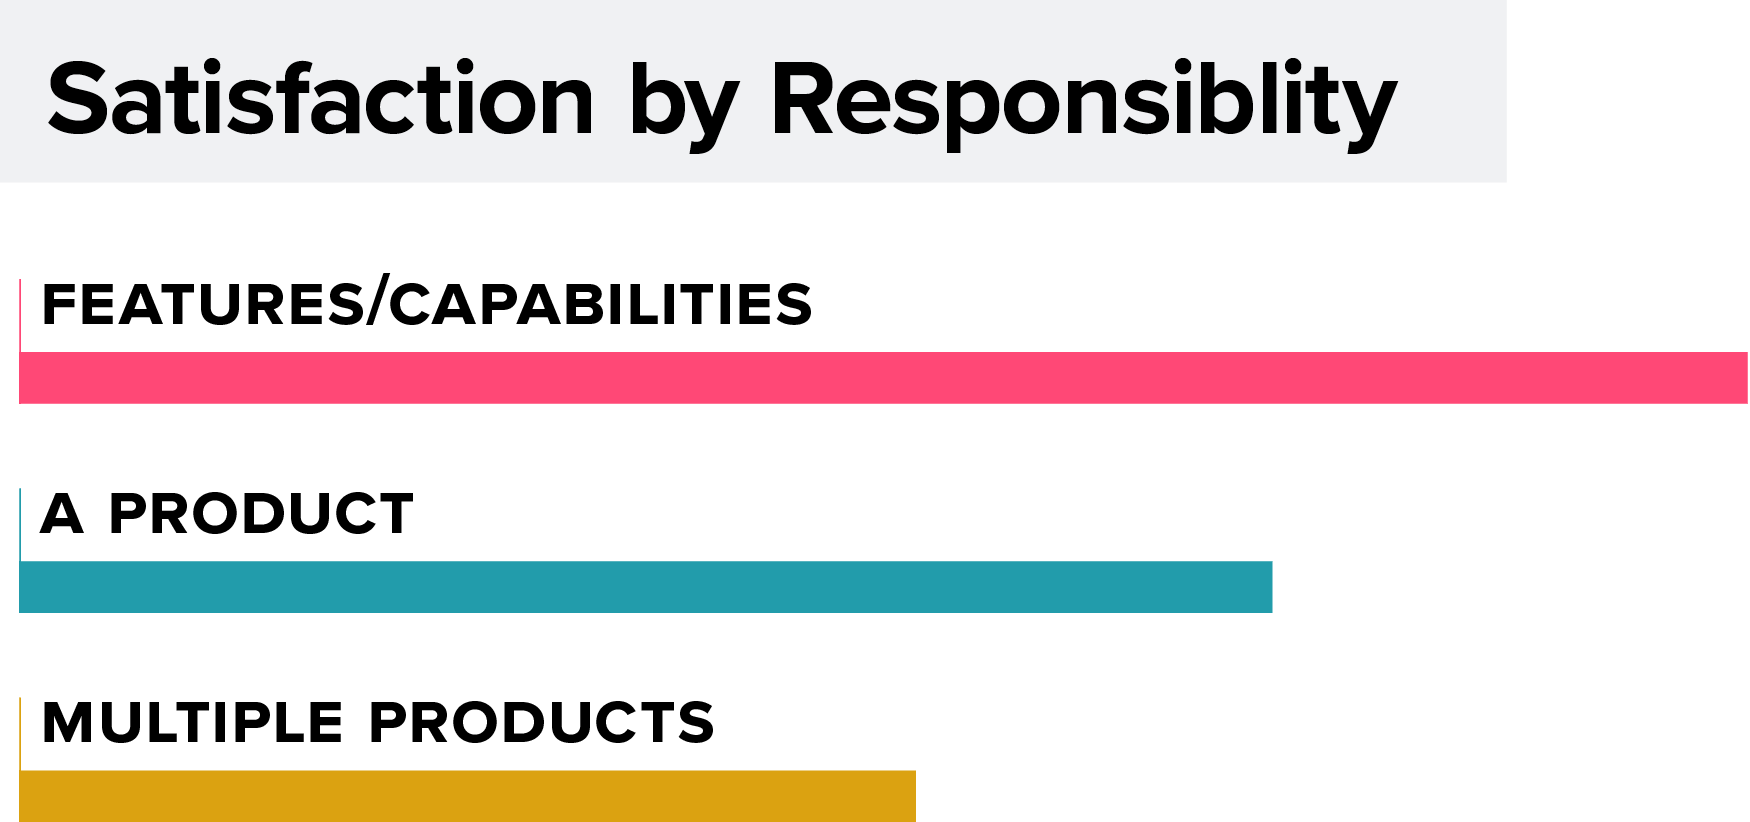 Survey Results Chart: Product Management Job Satisfaction by Responsibility